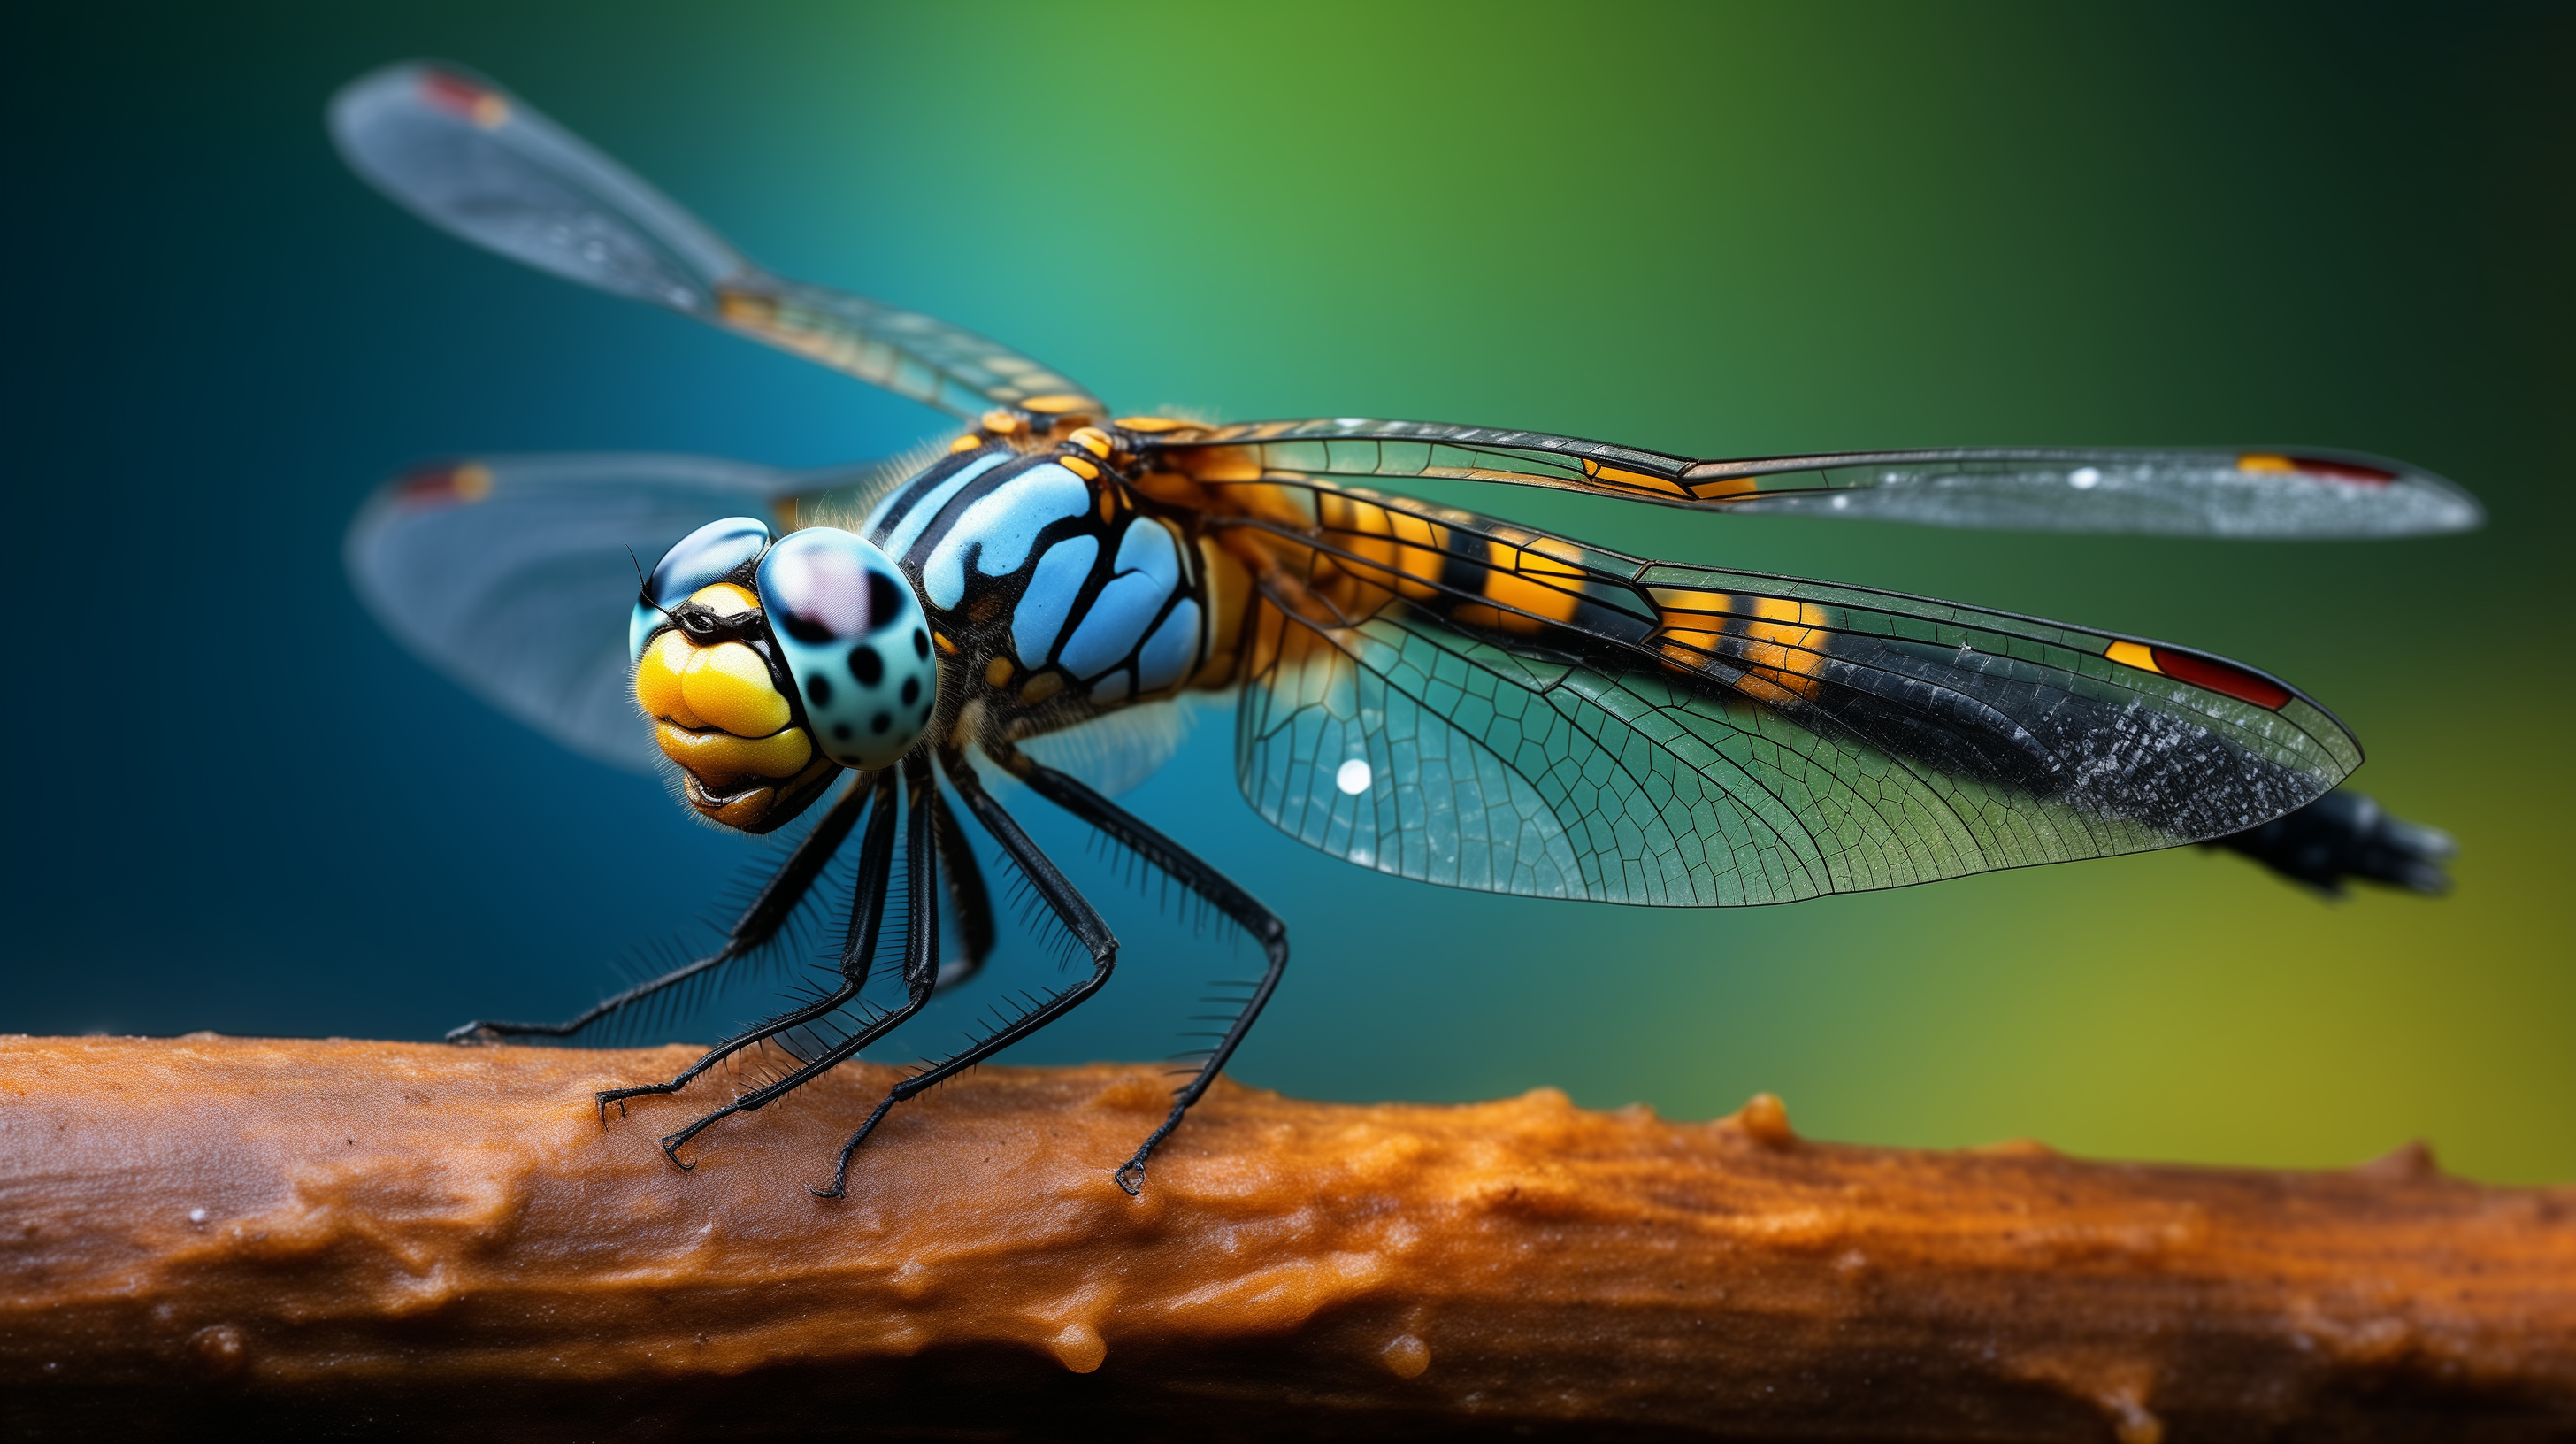 Close-up of a colorful dragonfly perched on a twig against a blurred green background, HD insect desktop wallpaper.